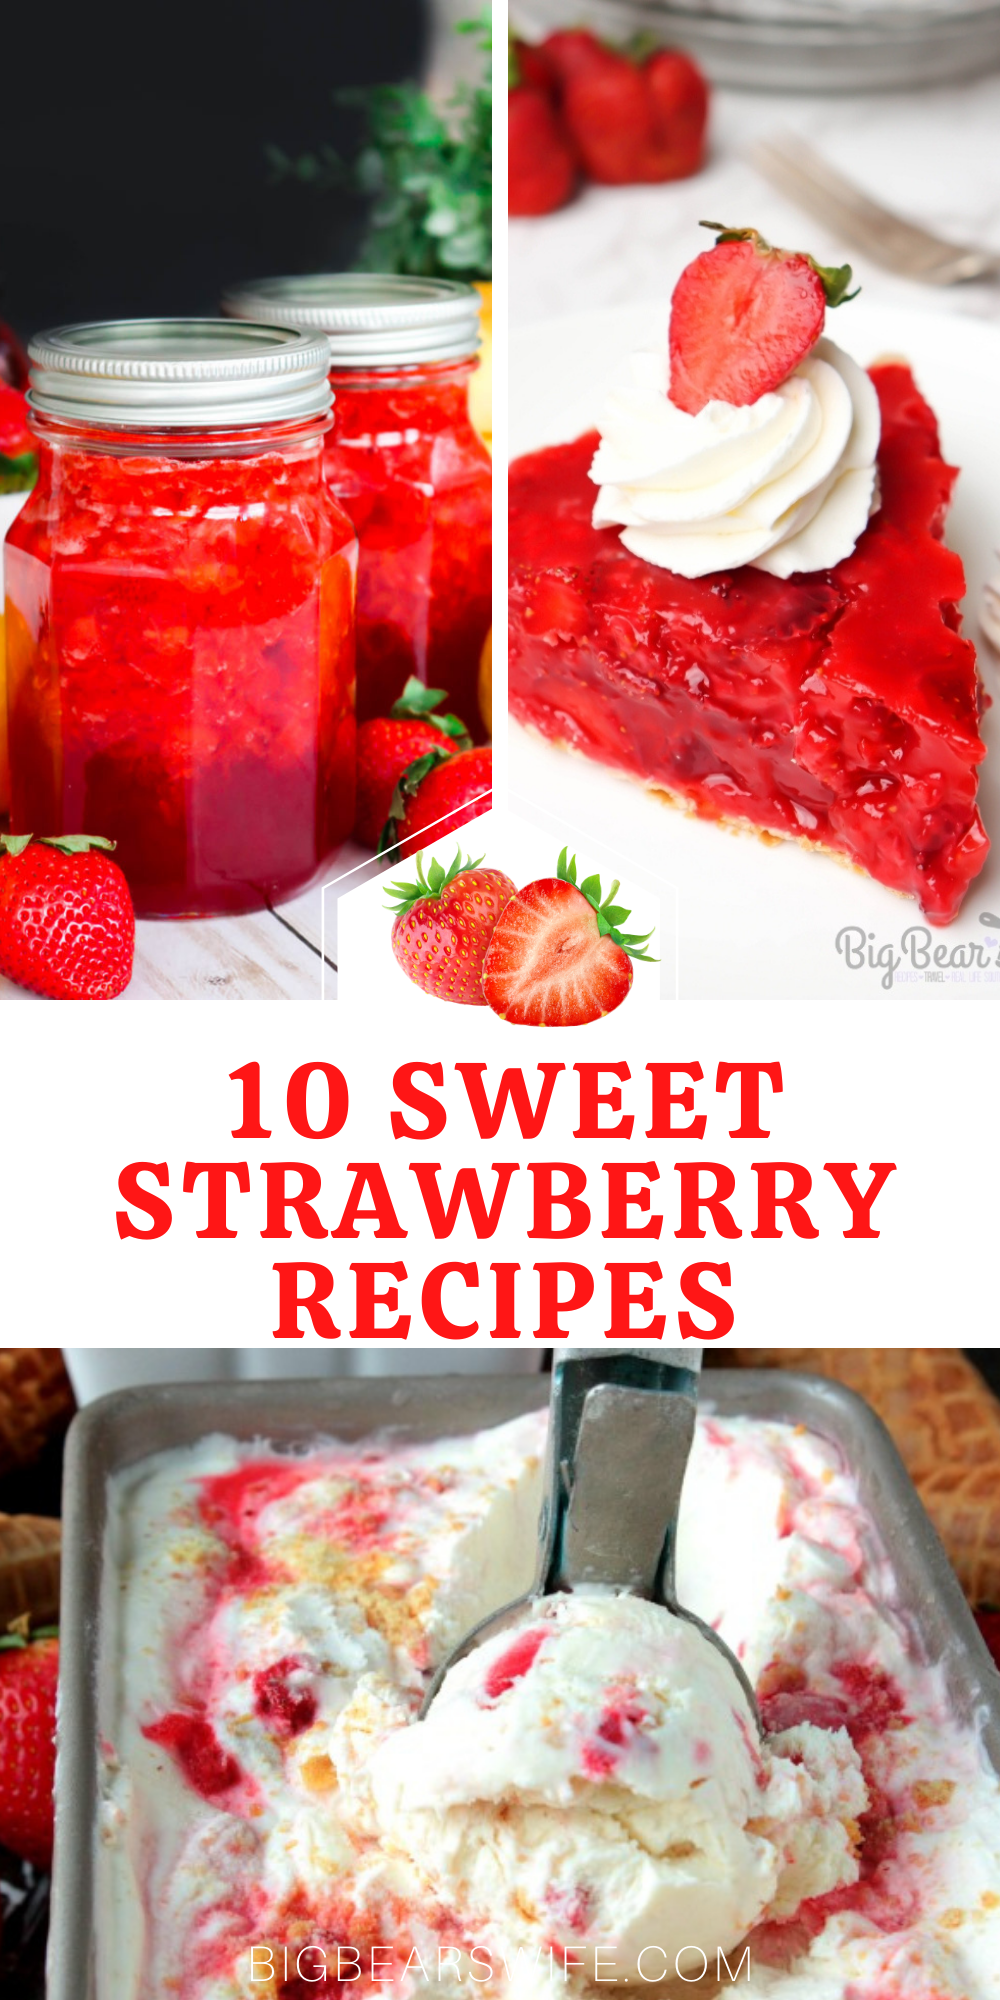 Summer weather is here which means it is time for tons of strawberry recipes! Here you'll find 10 sweet strawberry recipes that are perfect for those ripe summer strawberries!  via @bigbearswife